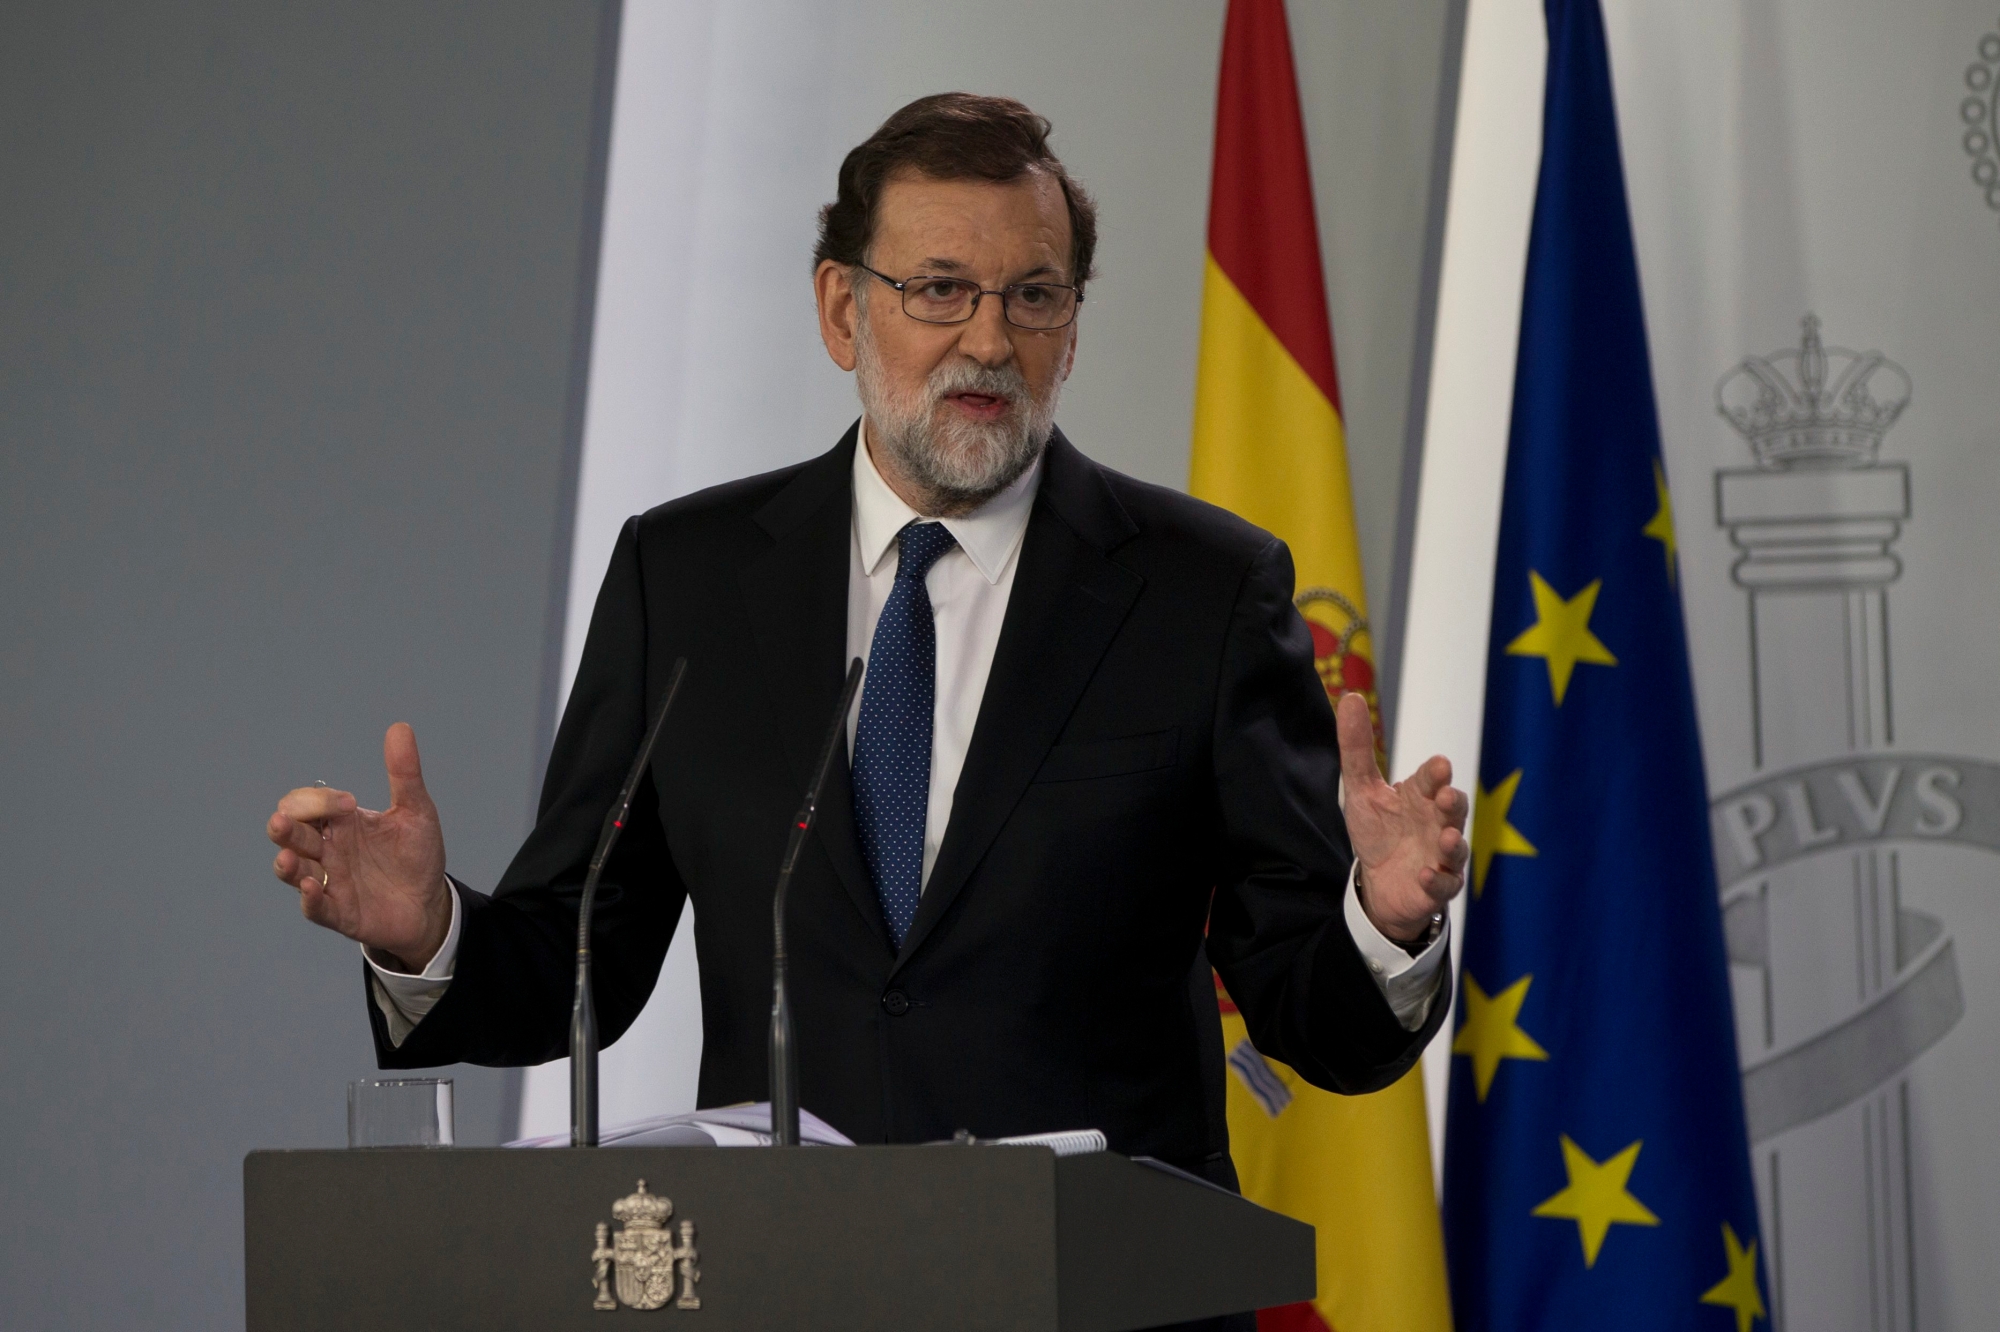 Spain's Prime Minister Mariano Rajoy speaks during a news conference at the Moncloa Palace in Madrid, Spain, Saturday, Oct. 21, 2017. The Spanish government moved to activate a previously untapped constitutional article Saturday so it can take control of Catalonia, illustrating its determination to derail the independence movement led by separatist politicians in the prosperous industrial region. (AP Photo/Paul White) Spain Catalonia